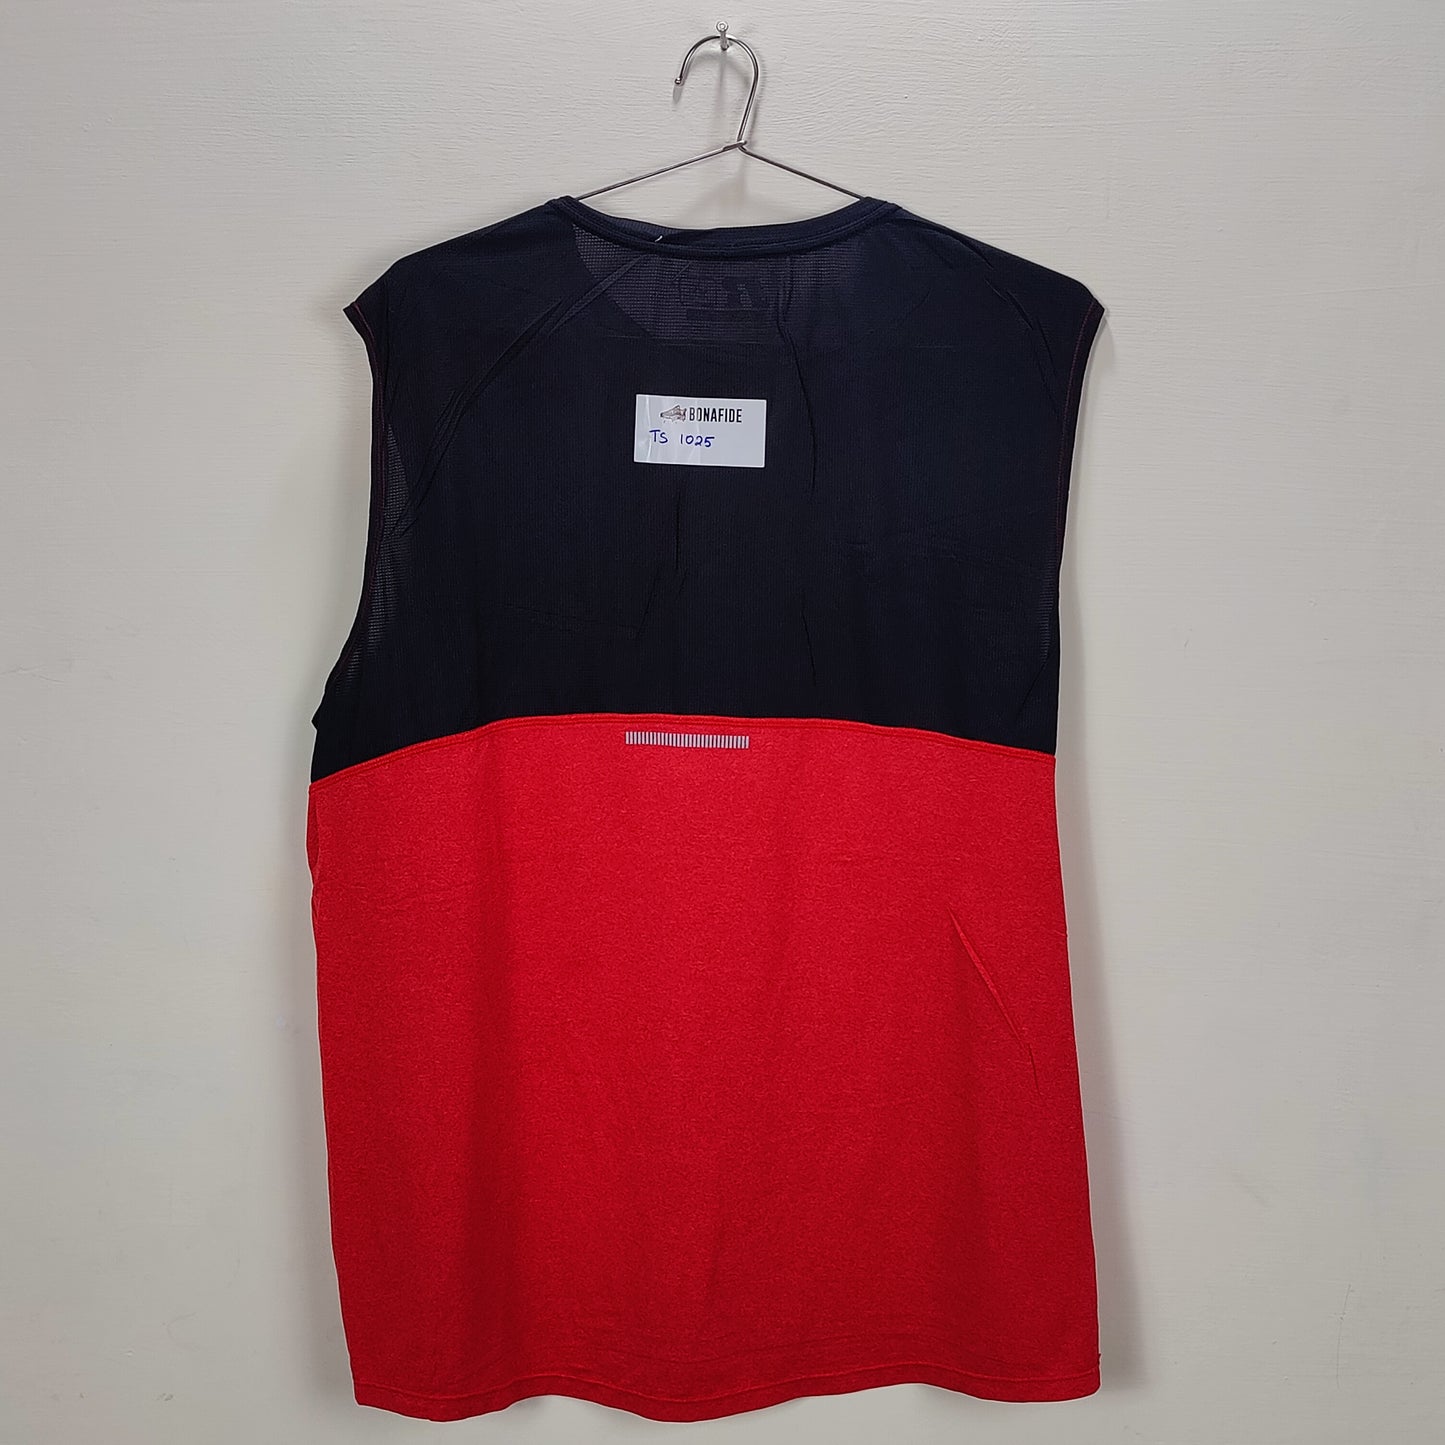 Russell Athletic Shirt - Red - TS1025